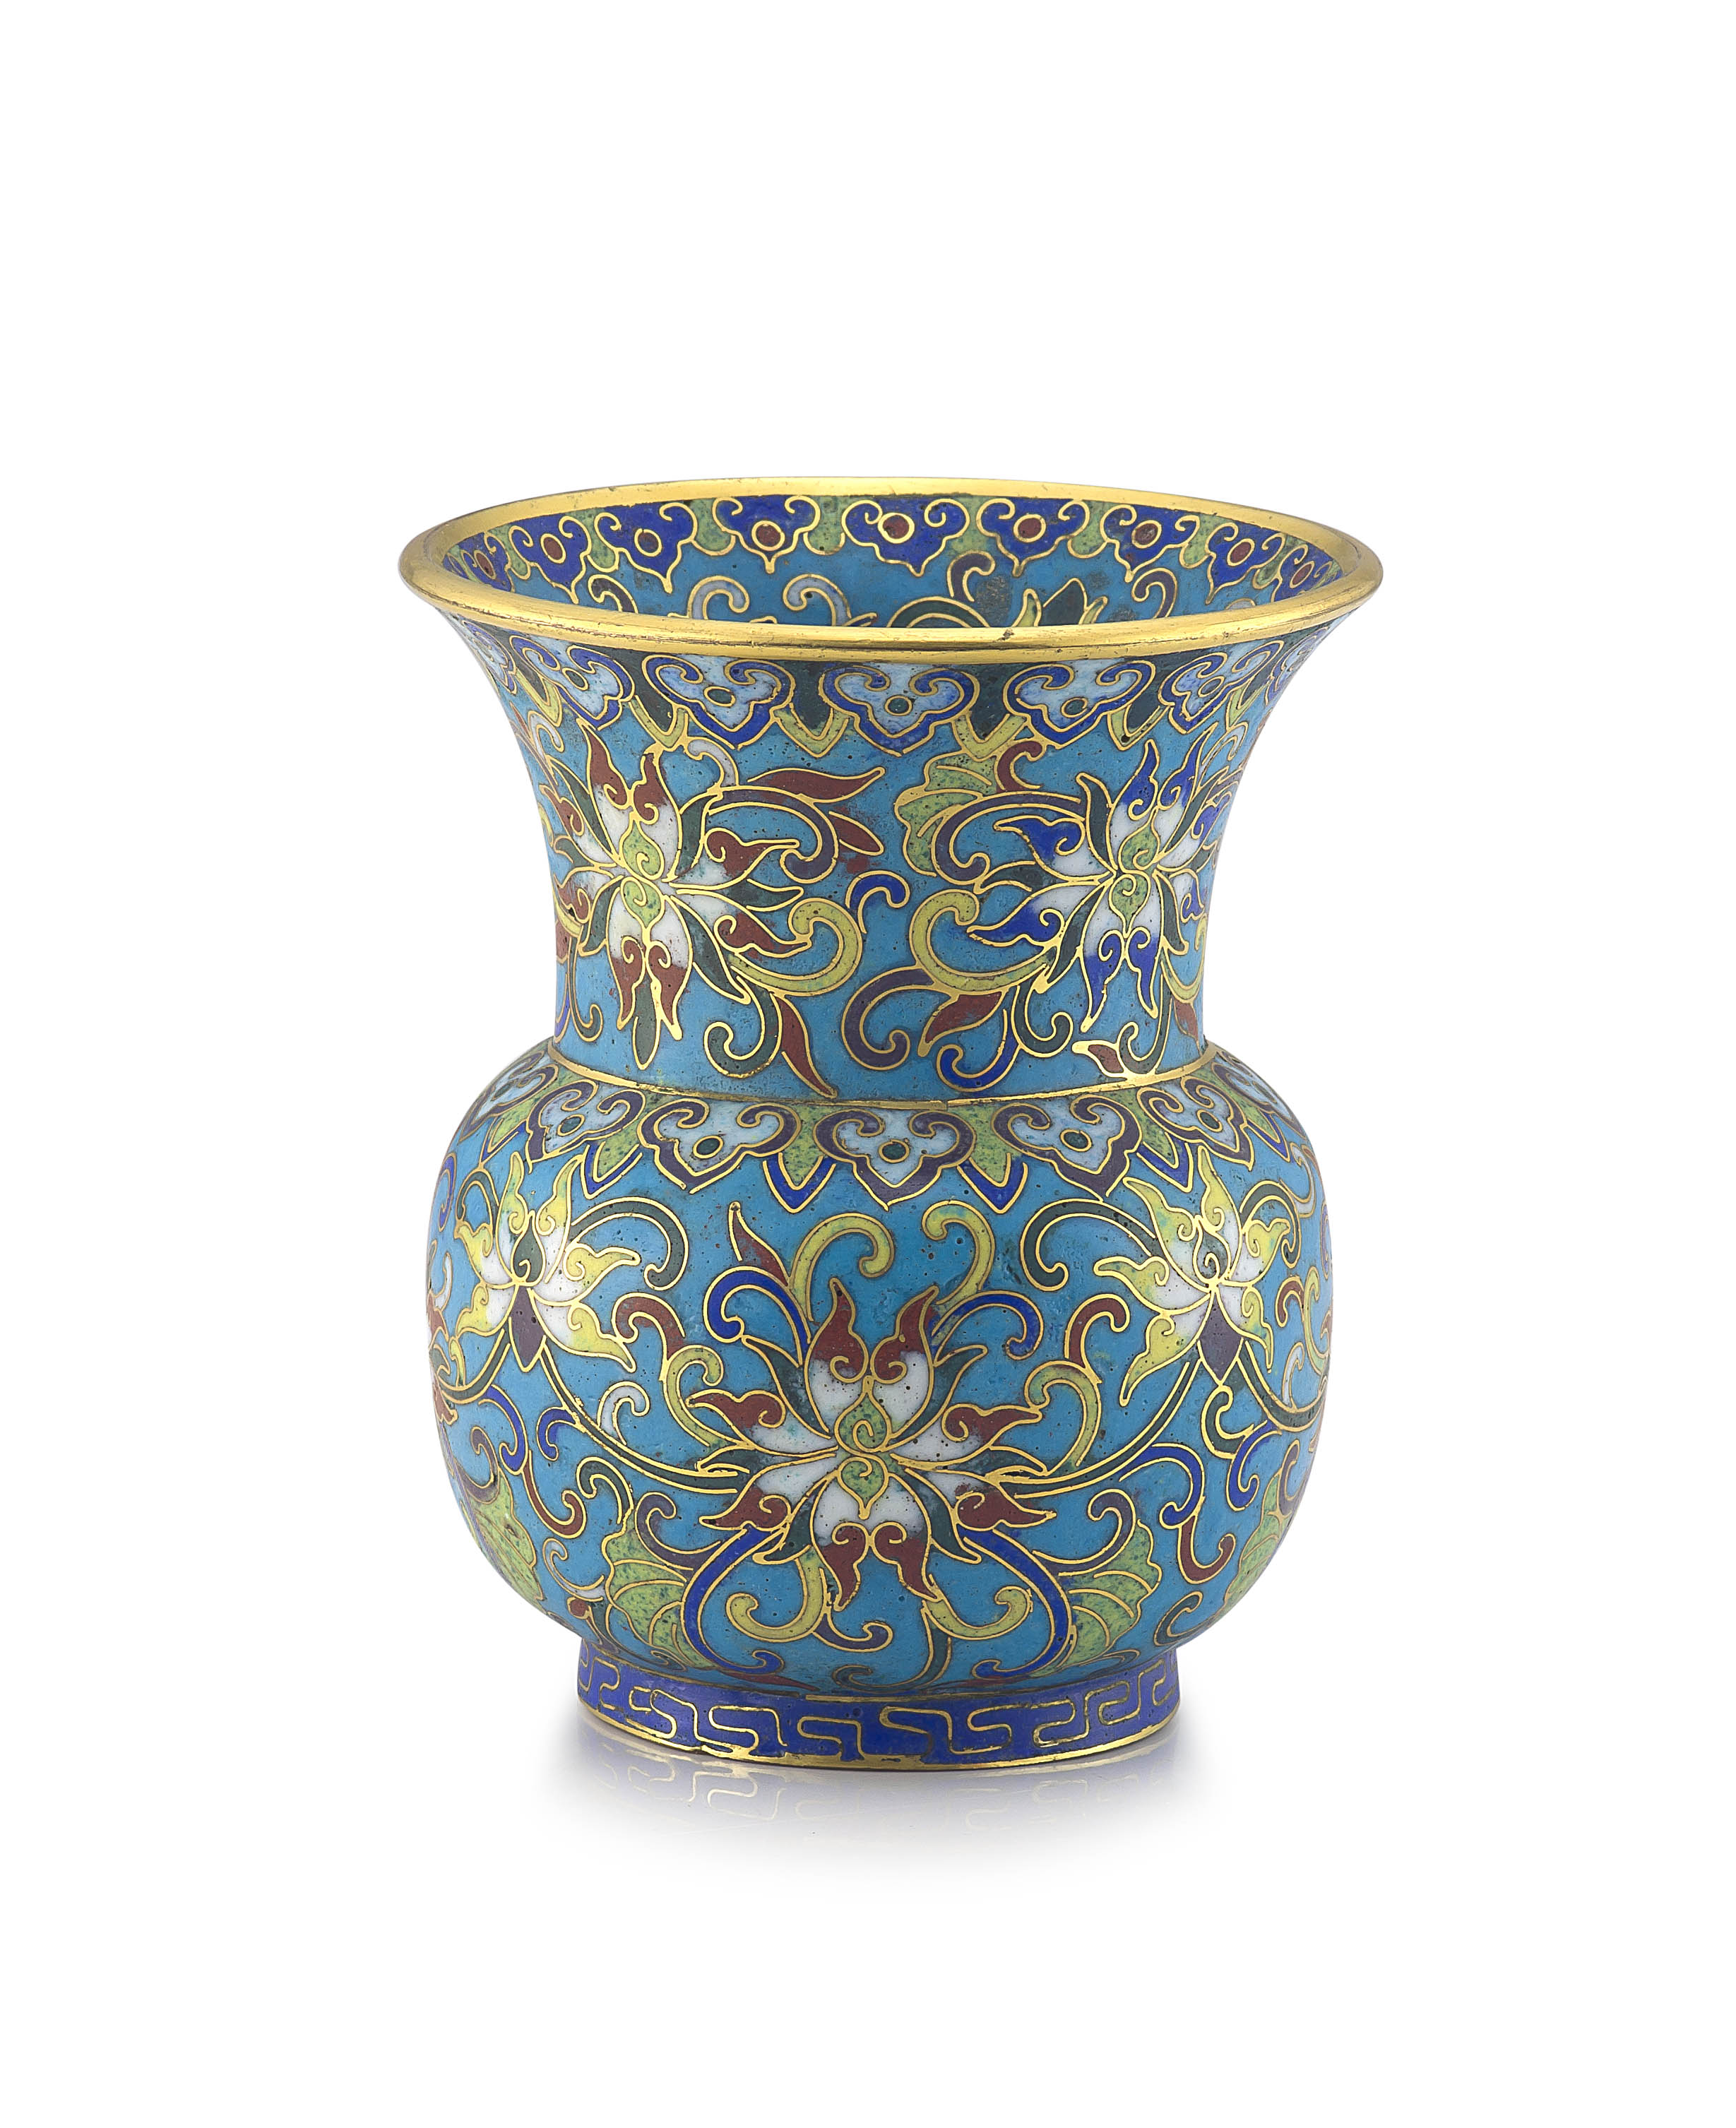 A Chinese cloisonné baluster vase, Qing Dynasty, late 19th century